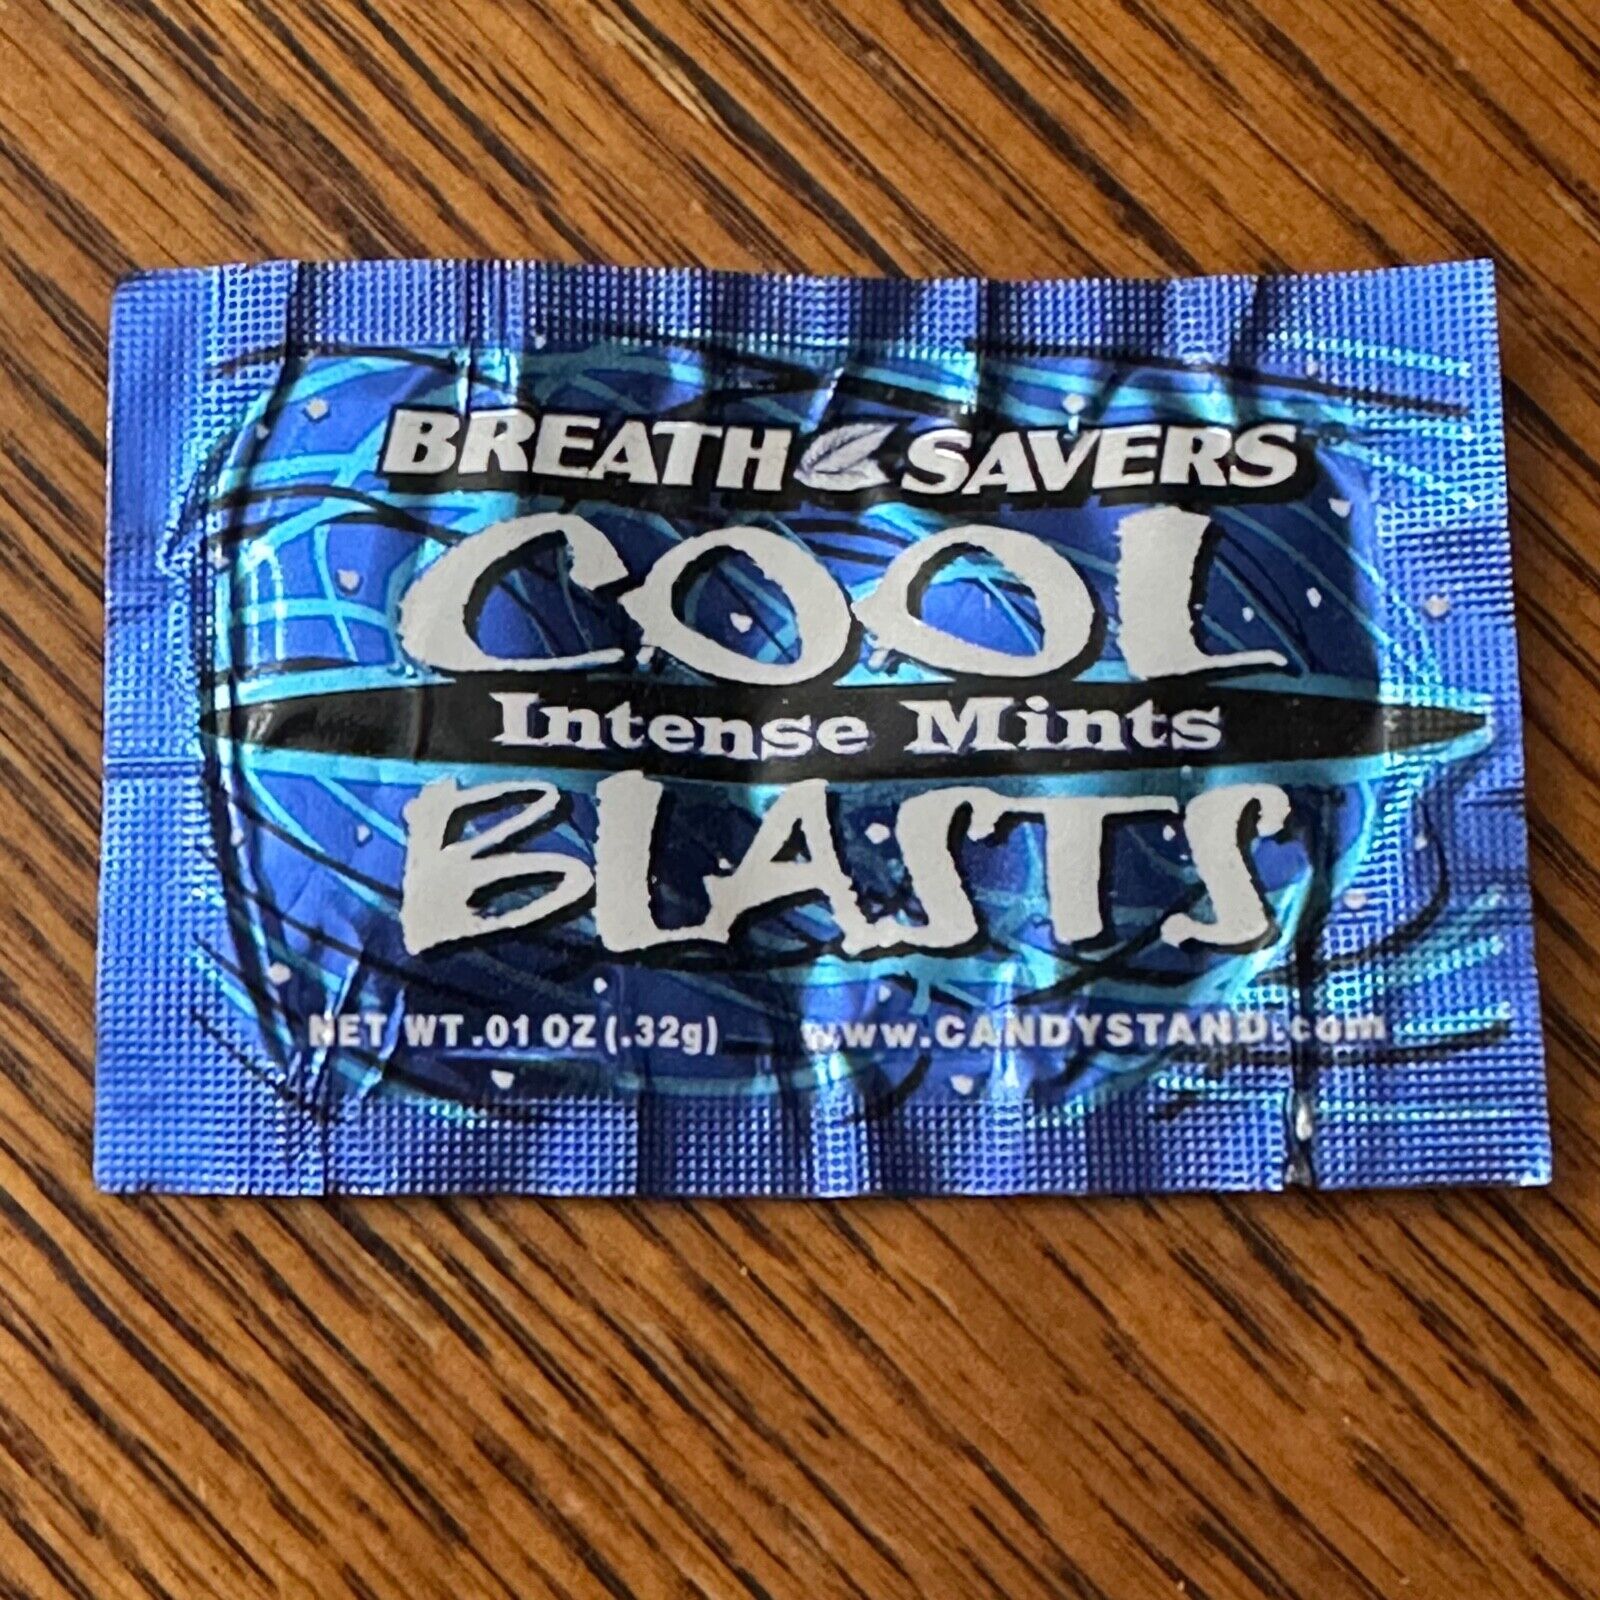 Breath Savers Cool Blasts Intense MintsSample Pack NOS ~2000 Candystand